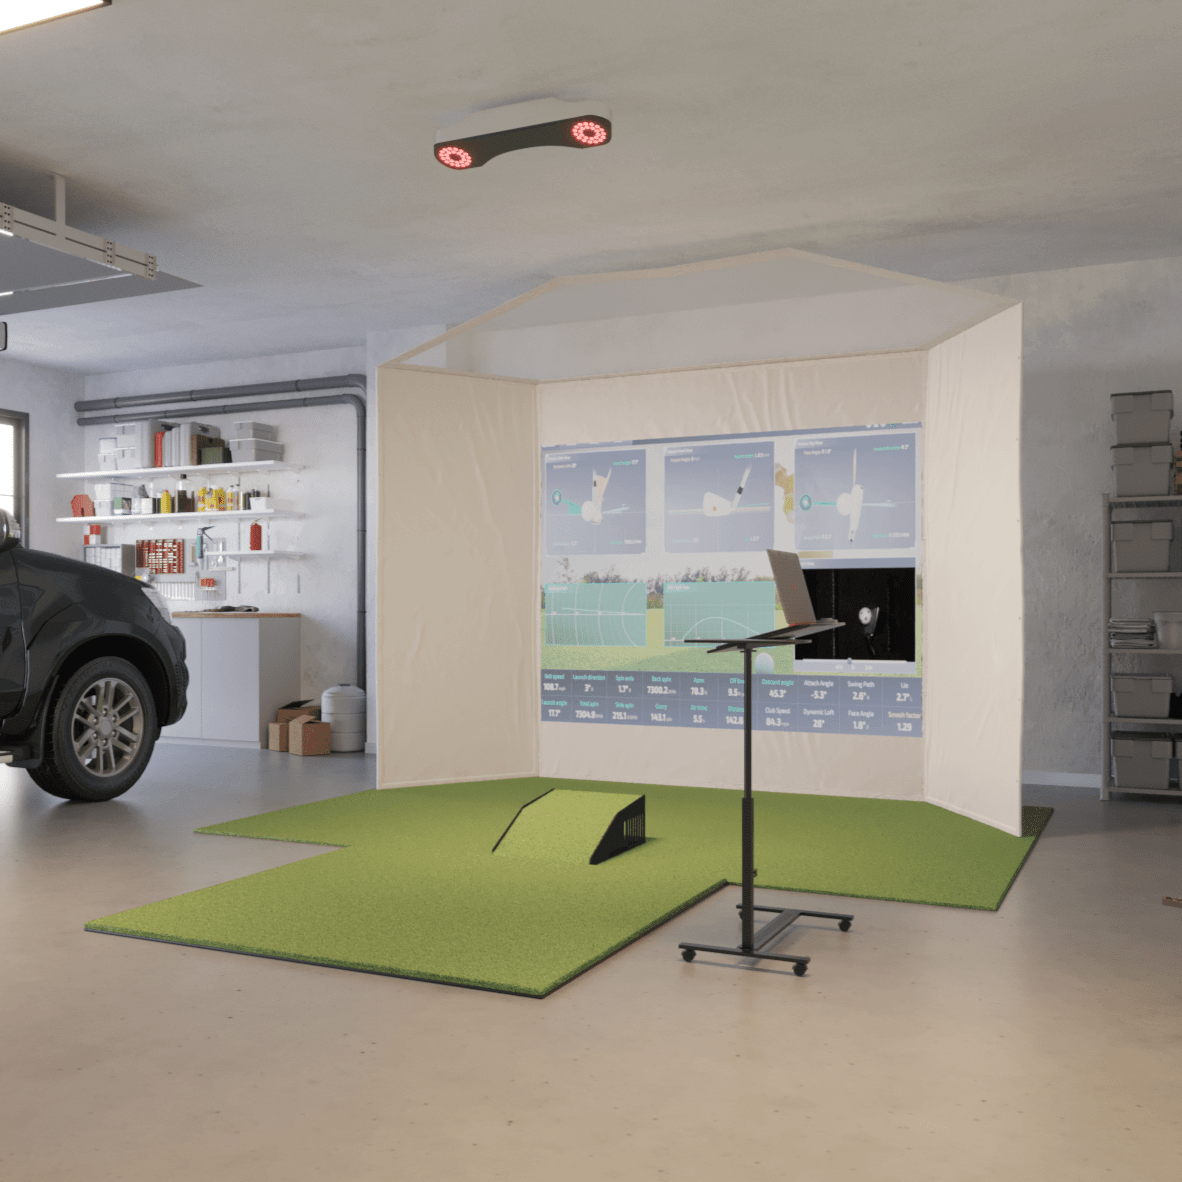 ProTee VX Retractable Golf Simulator Package